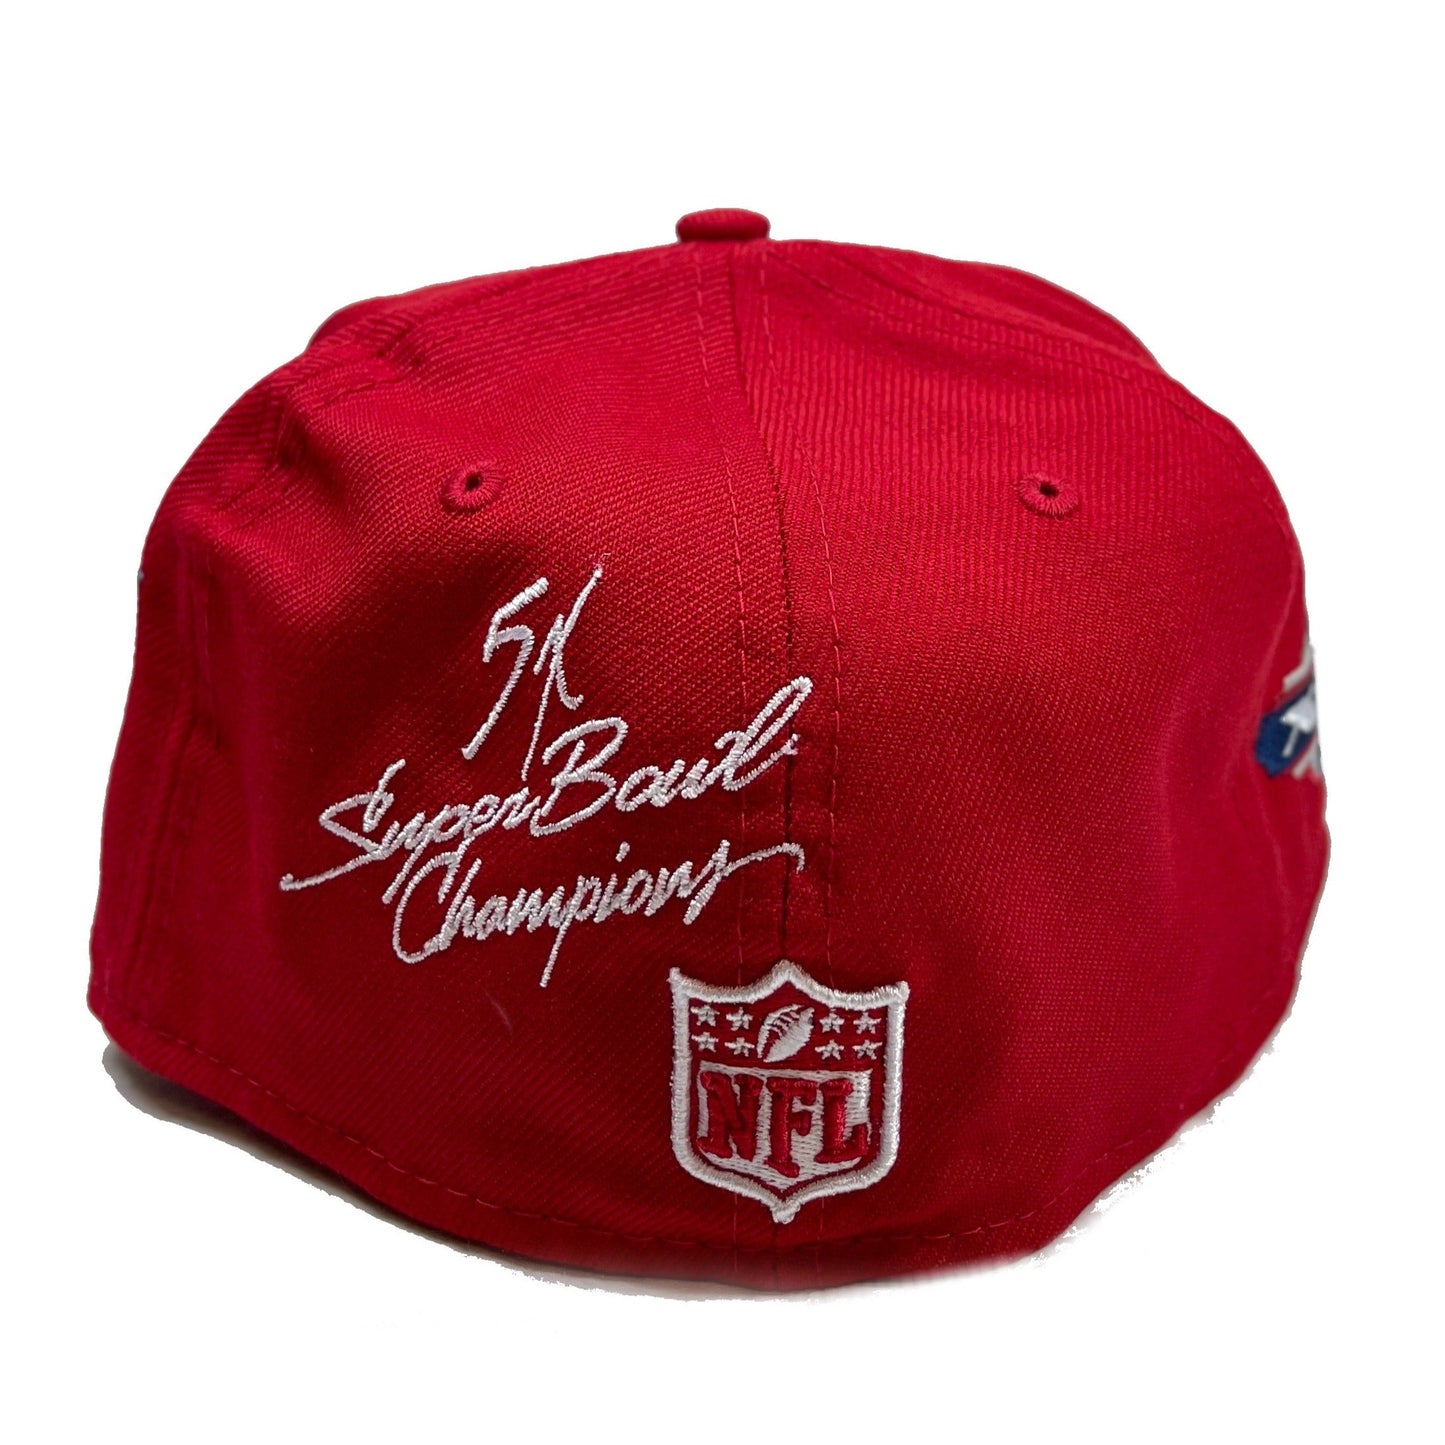 San Fransisco 49ers Super Bowl (Red) Fitted